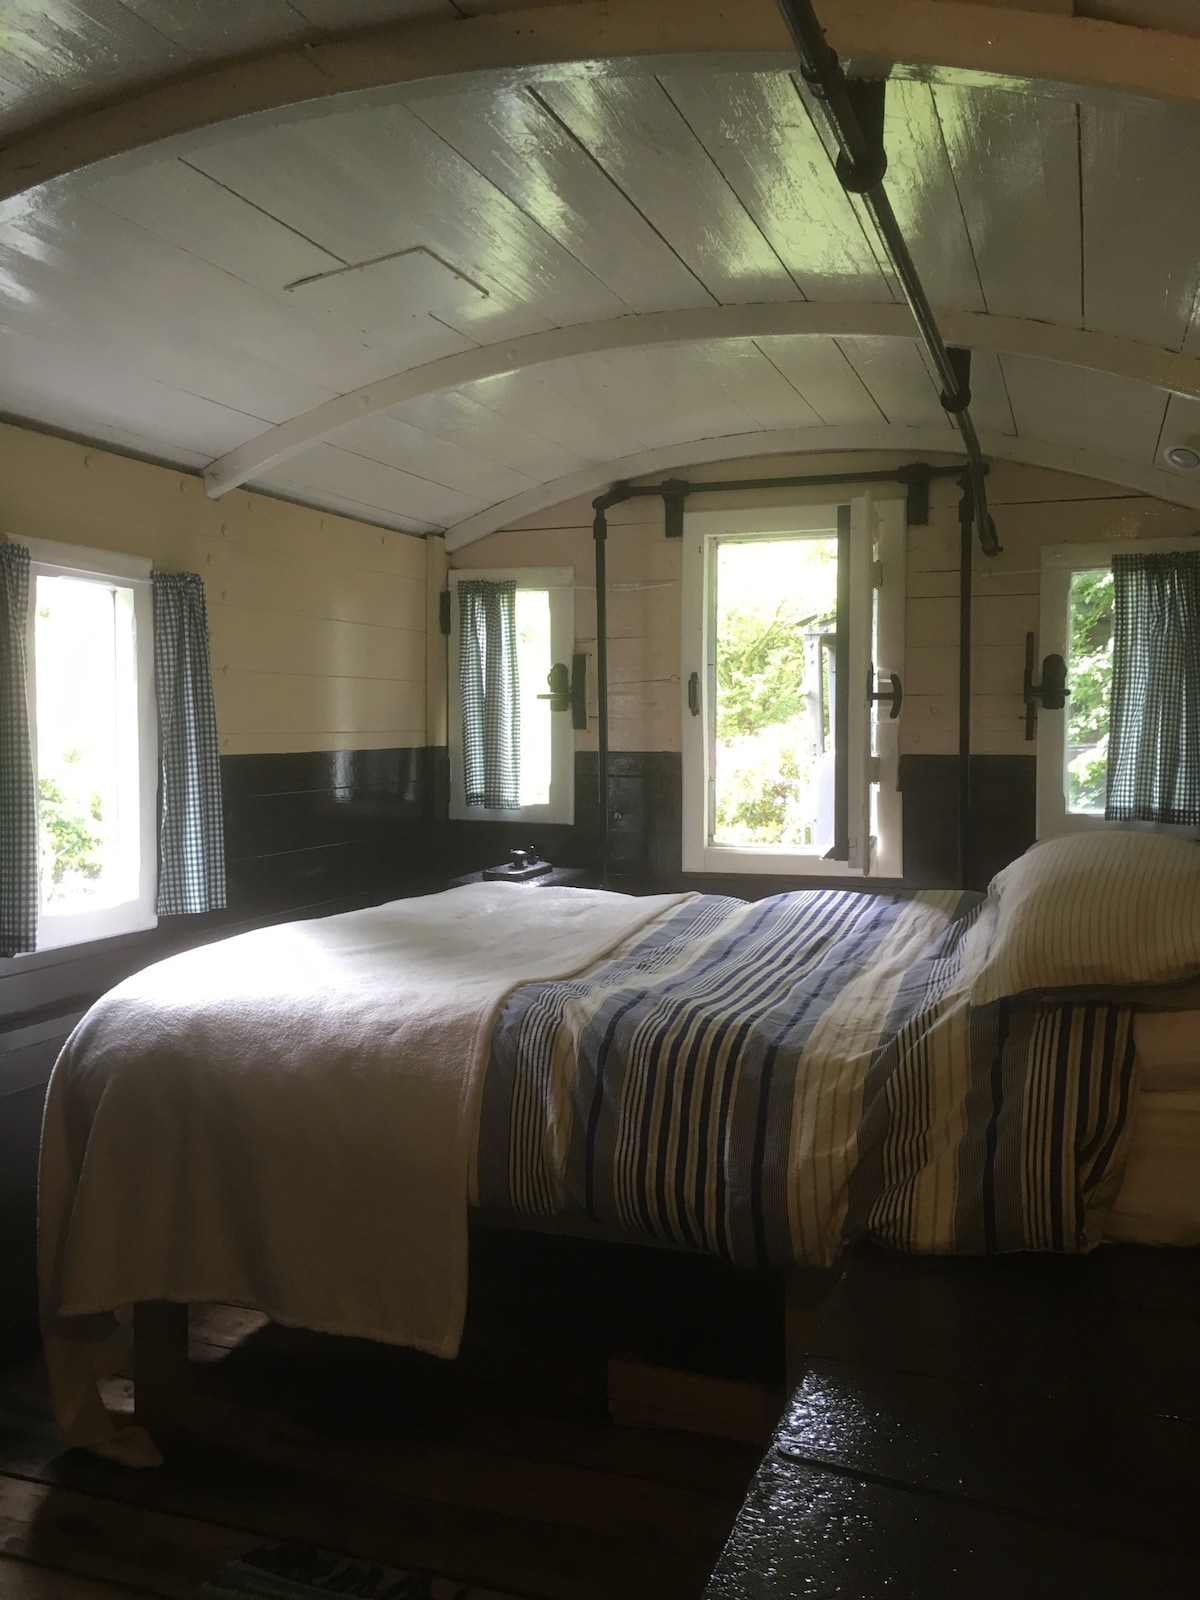 An Amazing Space:The Toad Brake Van